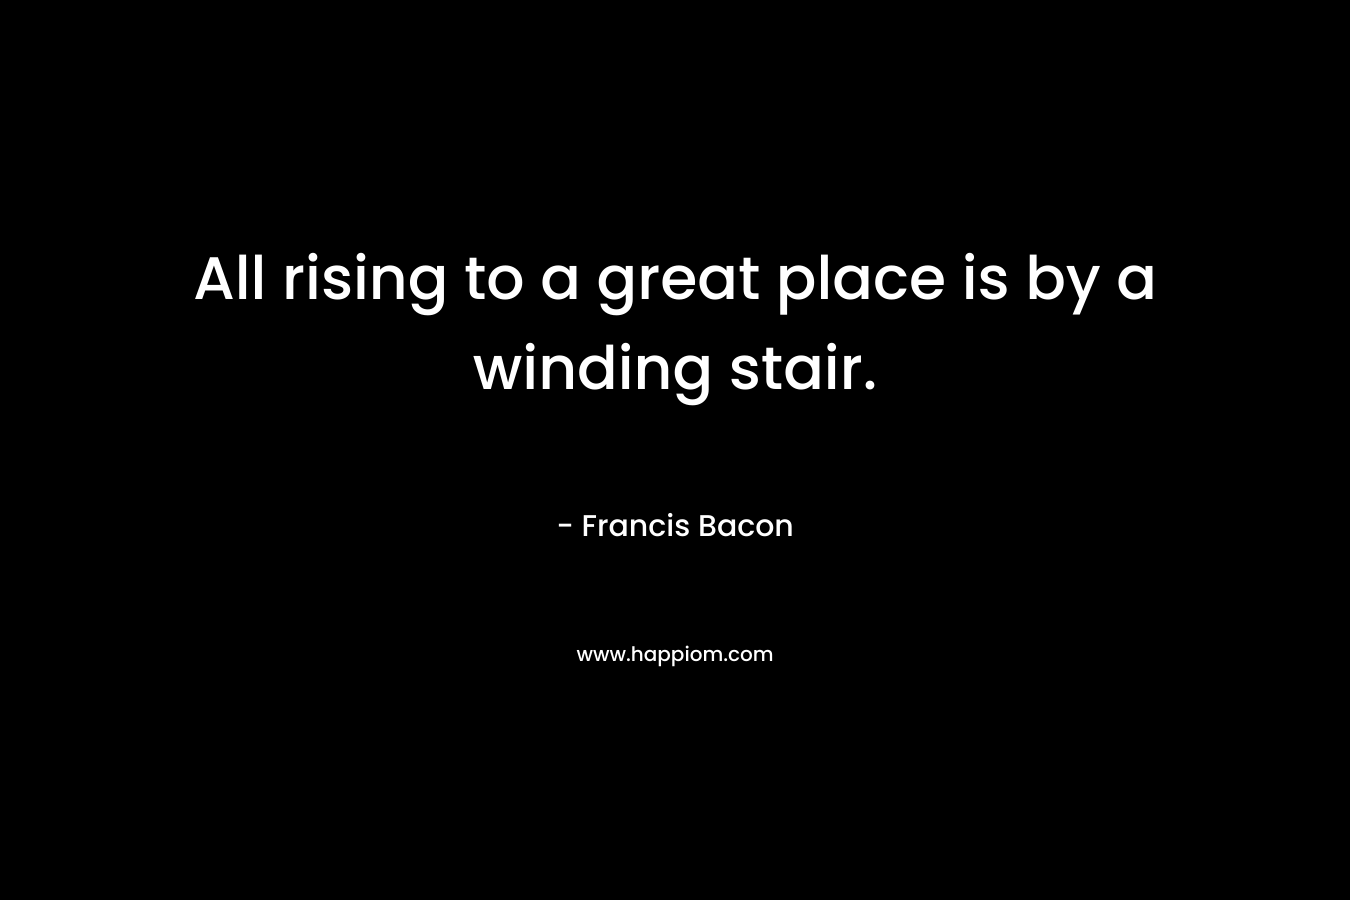 All rising to a great place is by a winding stair.